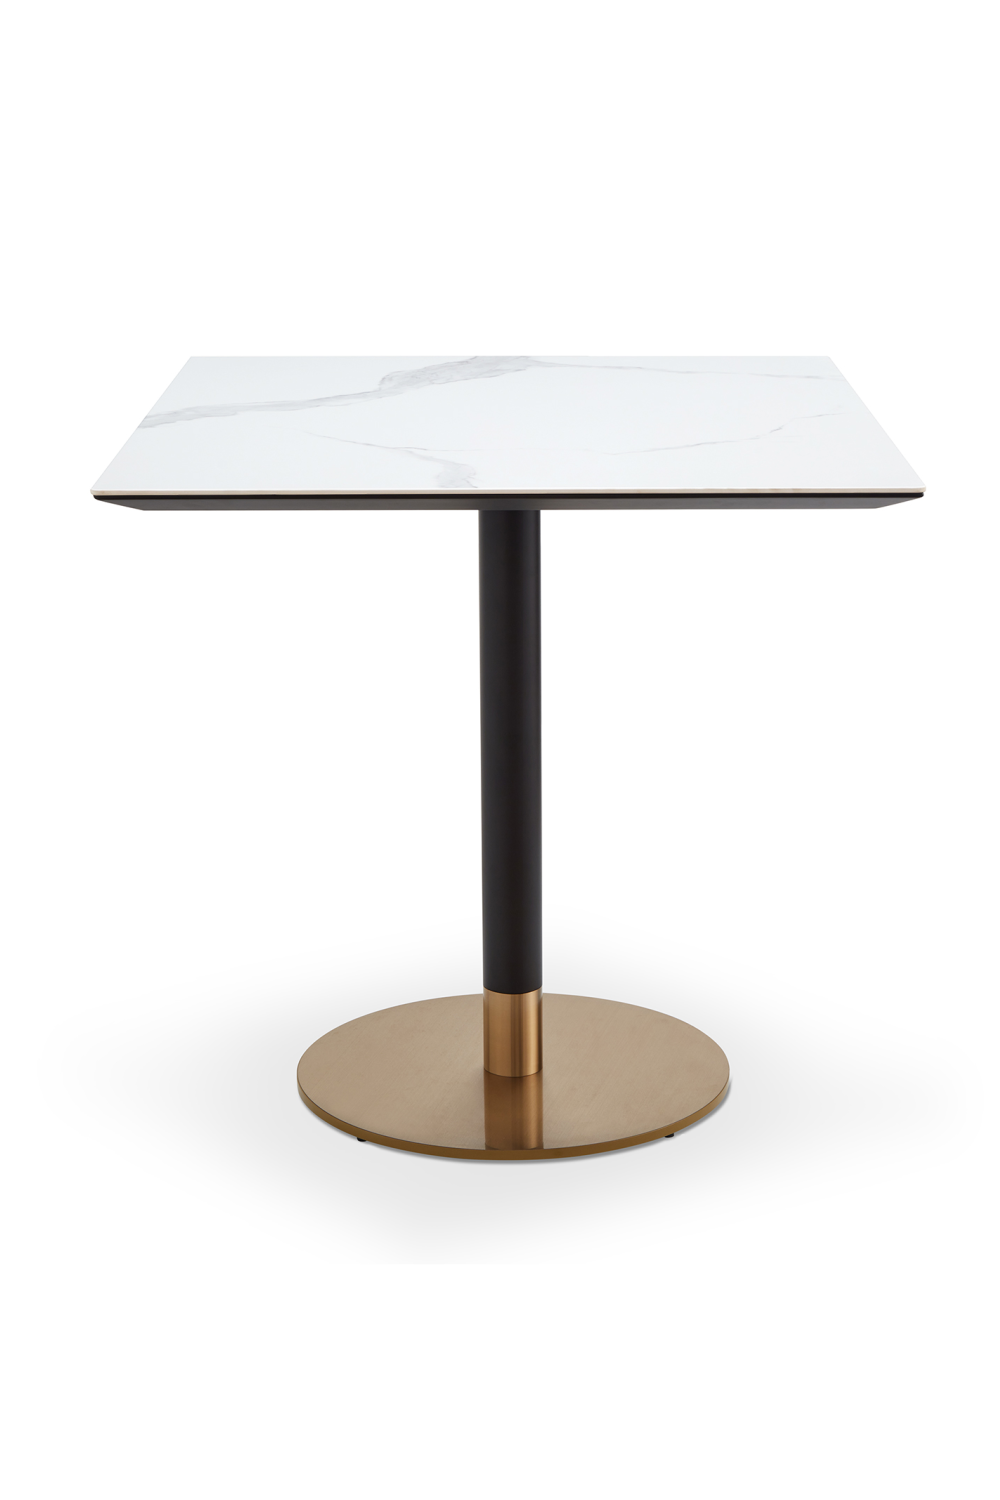 Image of Square Ceramic Dining Table | Liang & Eimil Theodore